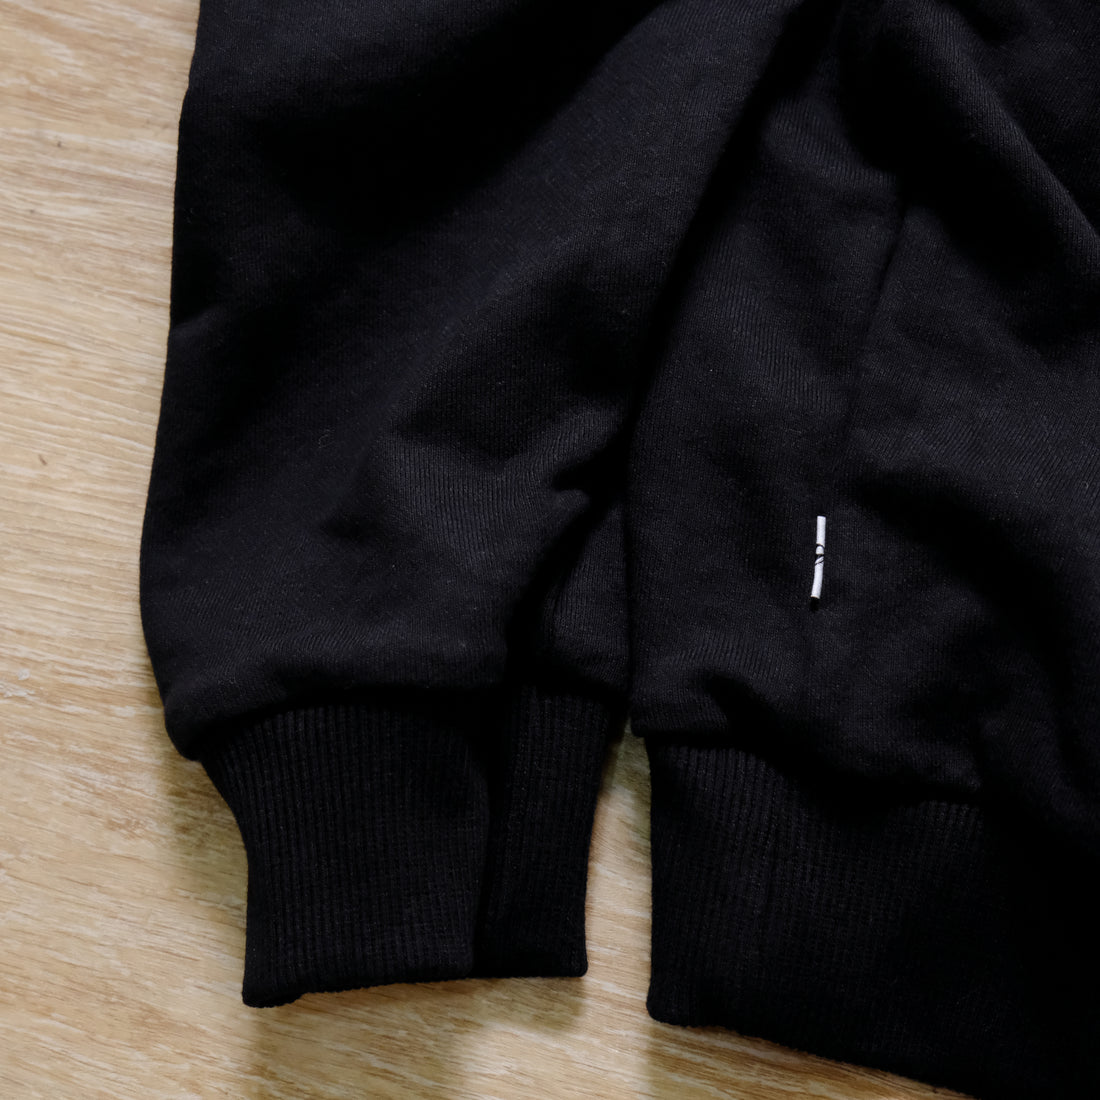 【THE SALVAGES / REVERSO LOGO HOODIE / OS】